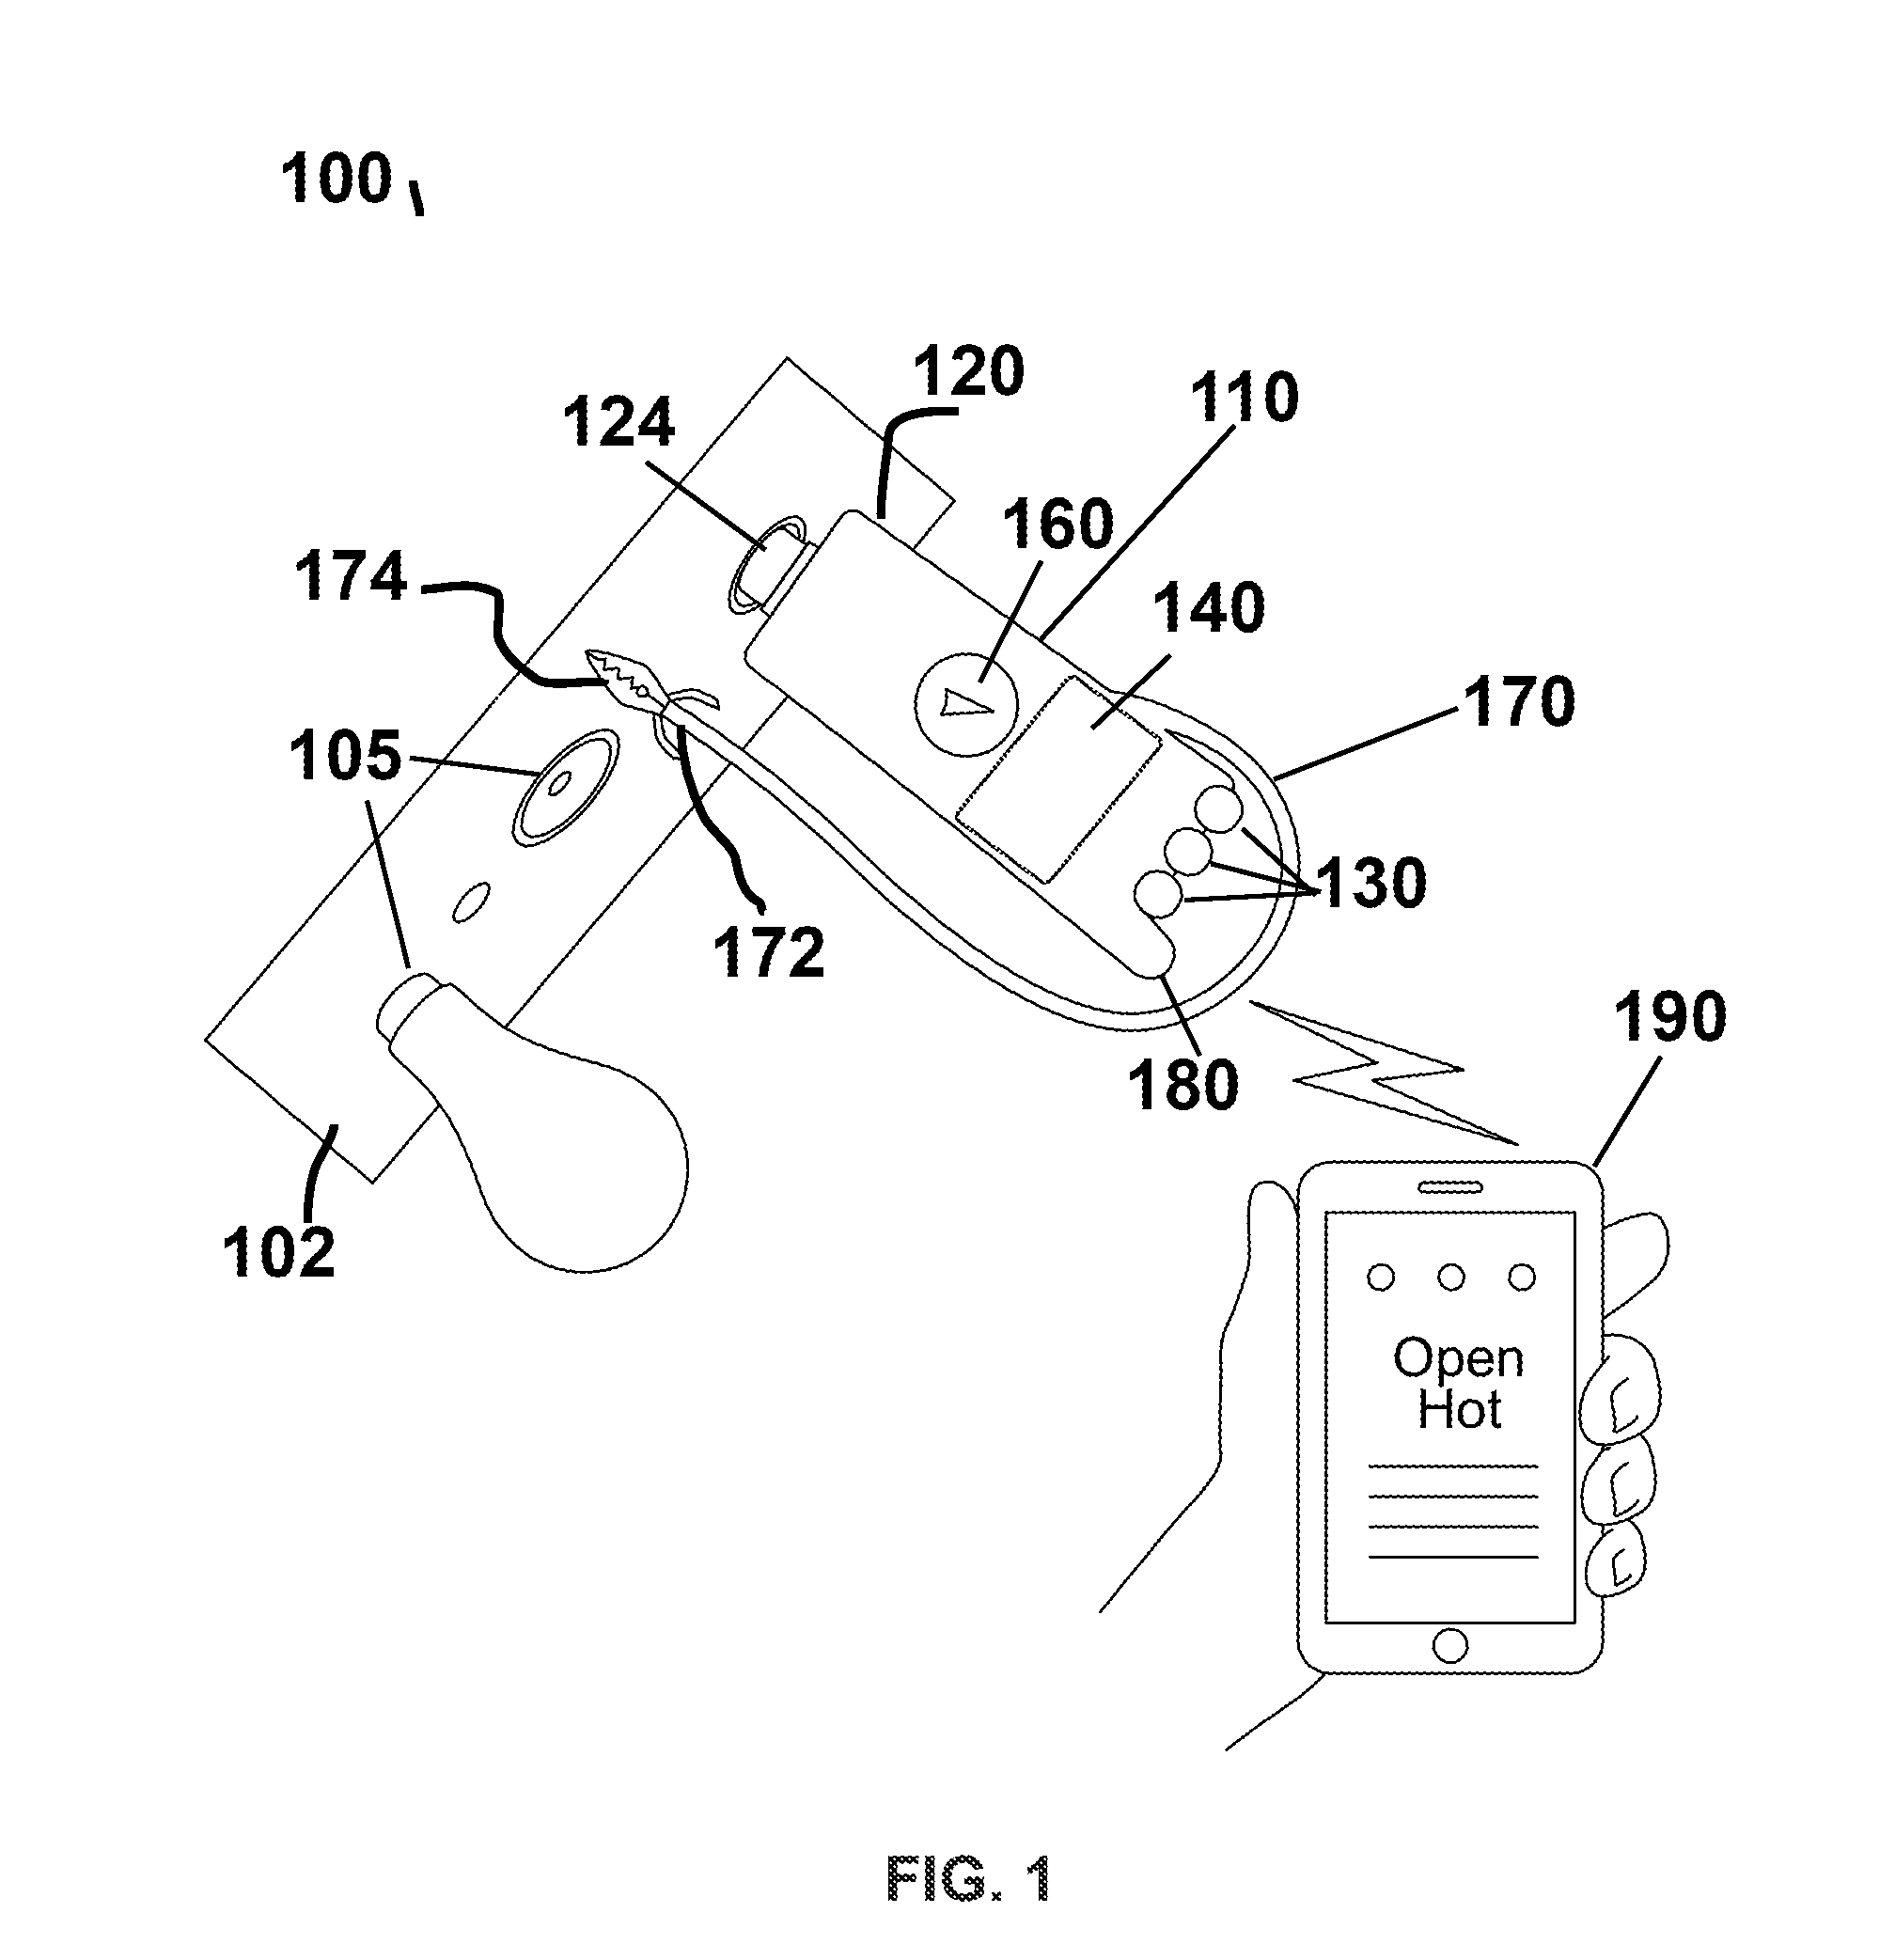 Testing device for electrical safety using wireless communication